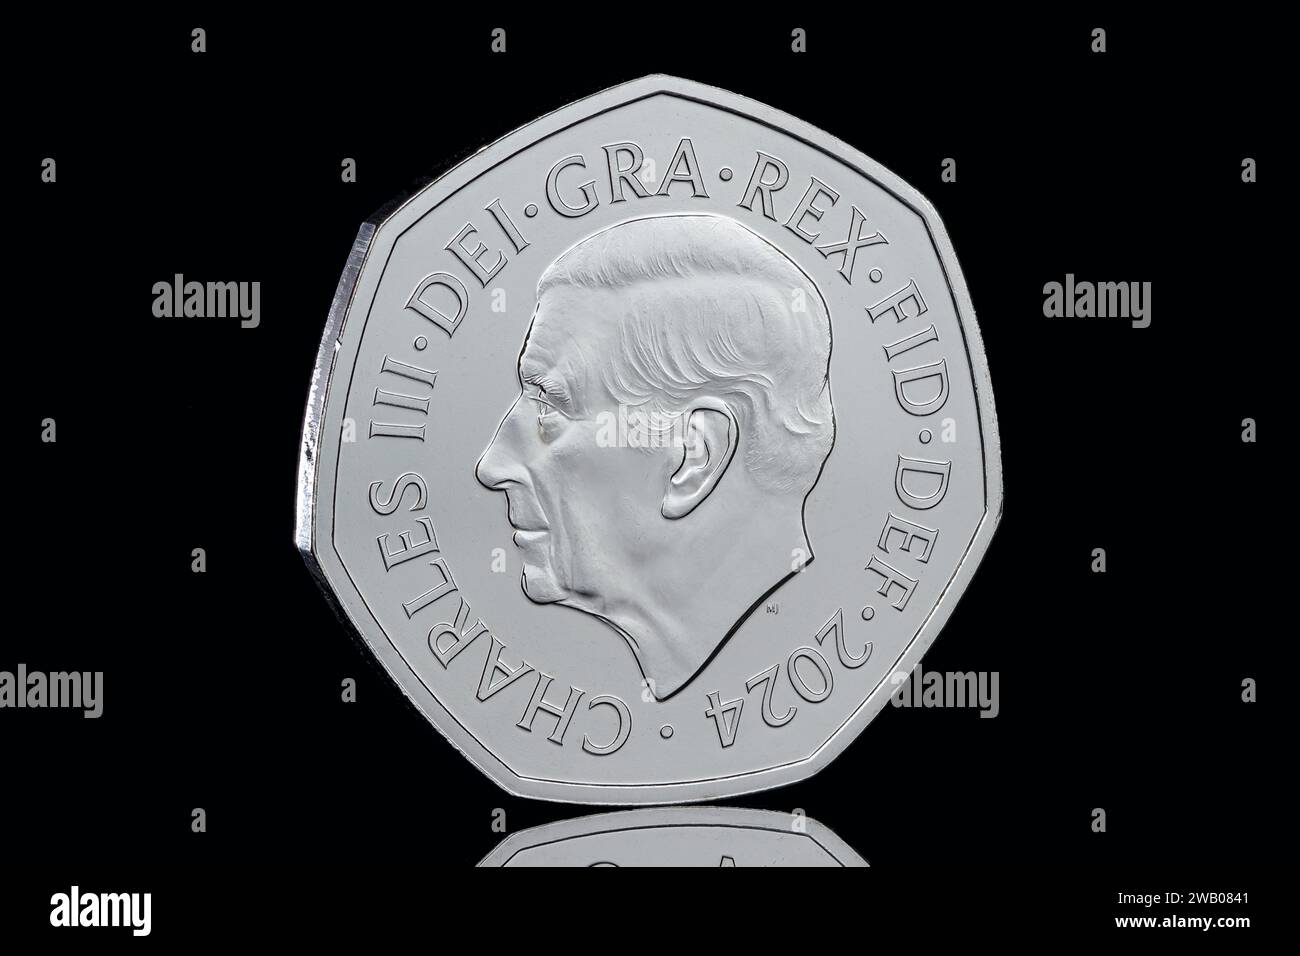 The Arctic Salmon 50 pence coin taken from the Definitive Annual Coin Set featuring the first coin portrait of King Charles III by Martin Jennings Stock Photo